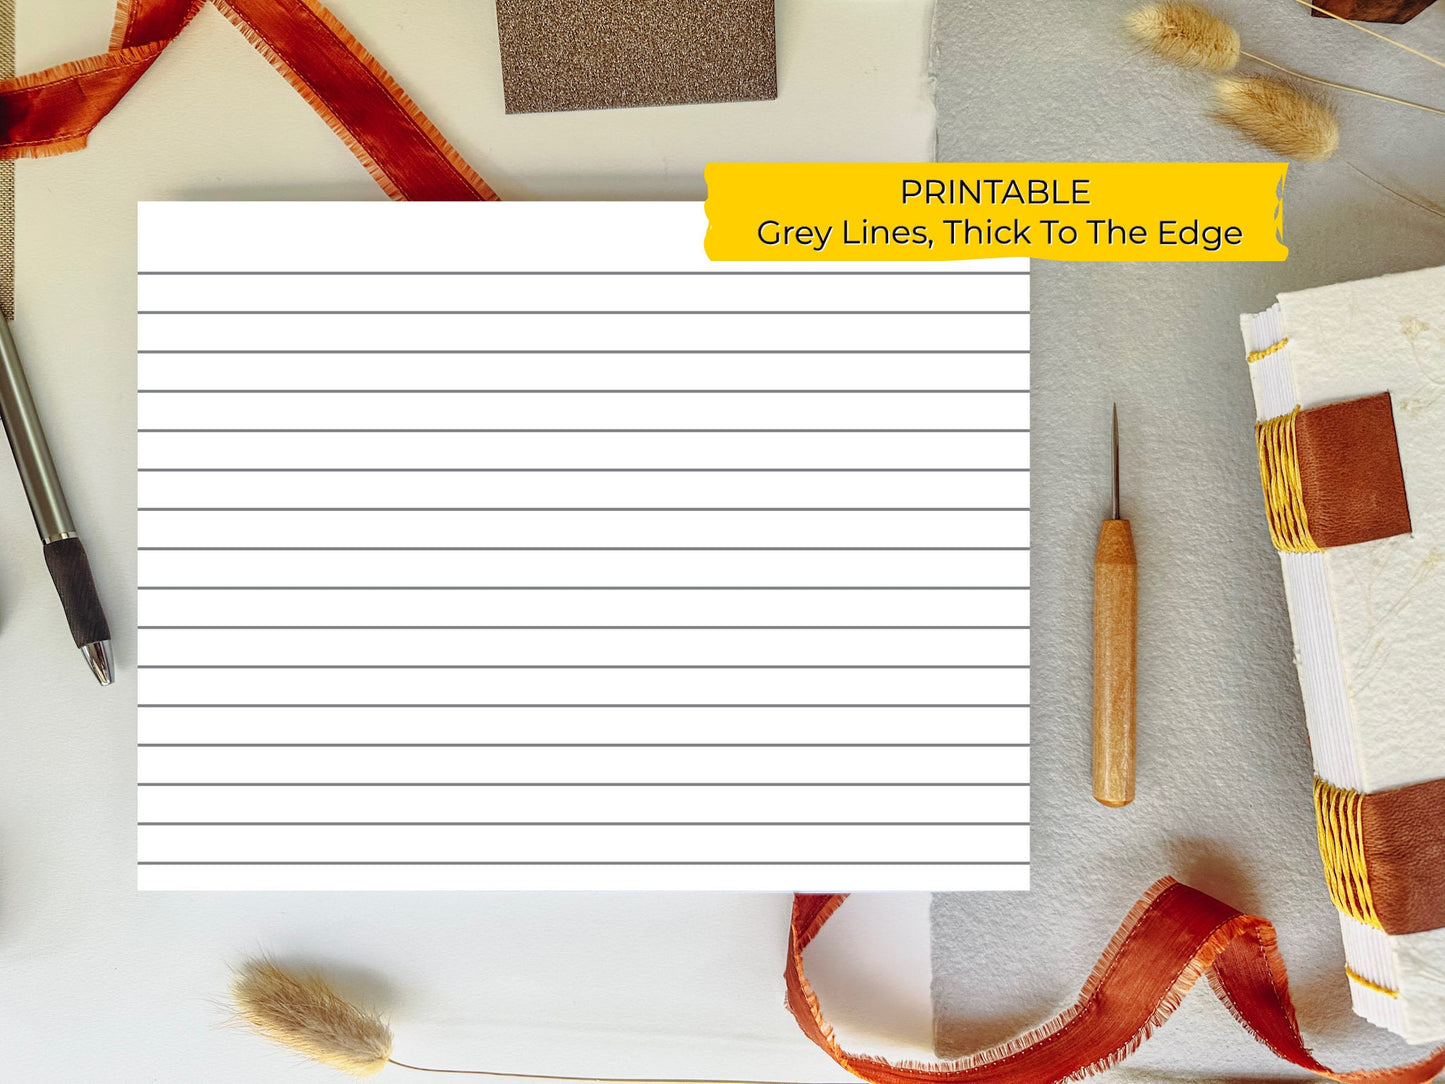 8.5 x 11 Thick To Edge LINED/RULED PRINTABLE Digital Book Binding Signature File - Grey Lines